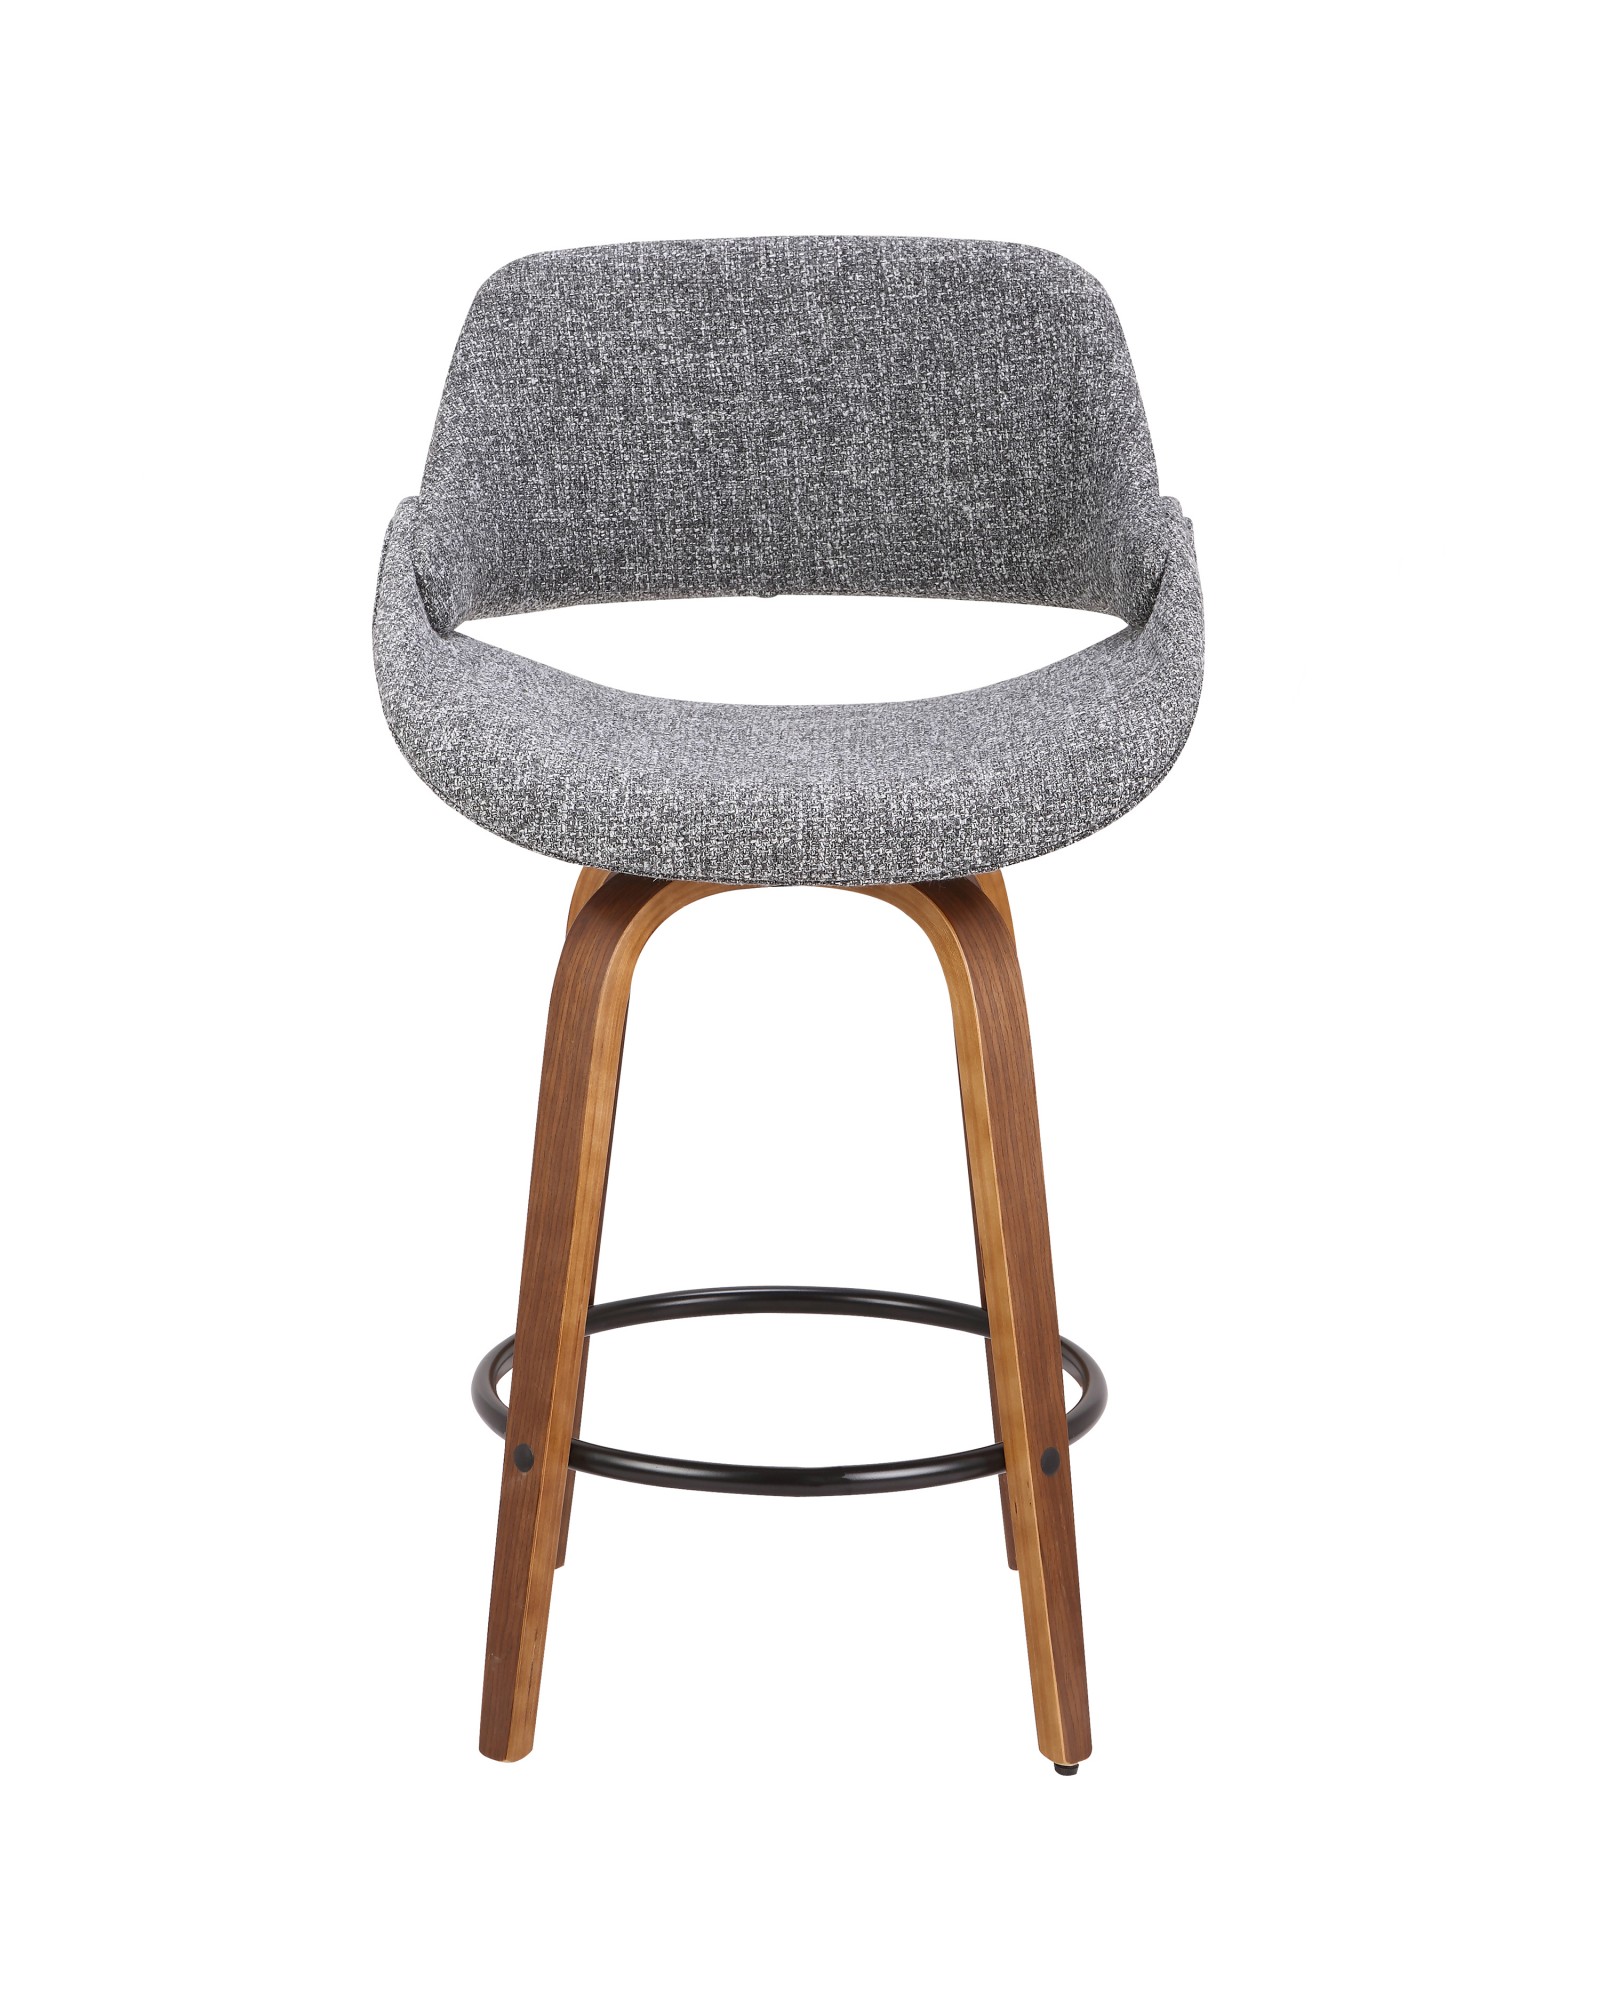 Fabrico Mid-Century Modern Counter Stool in Walnut and Grey Noise Fabric